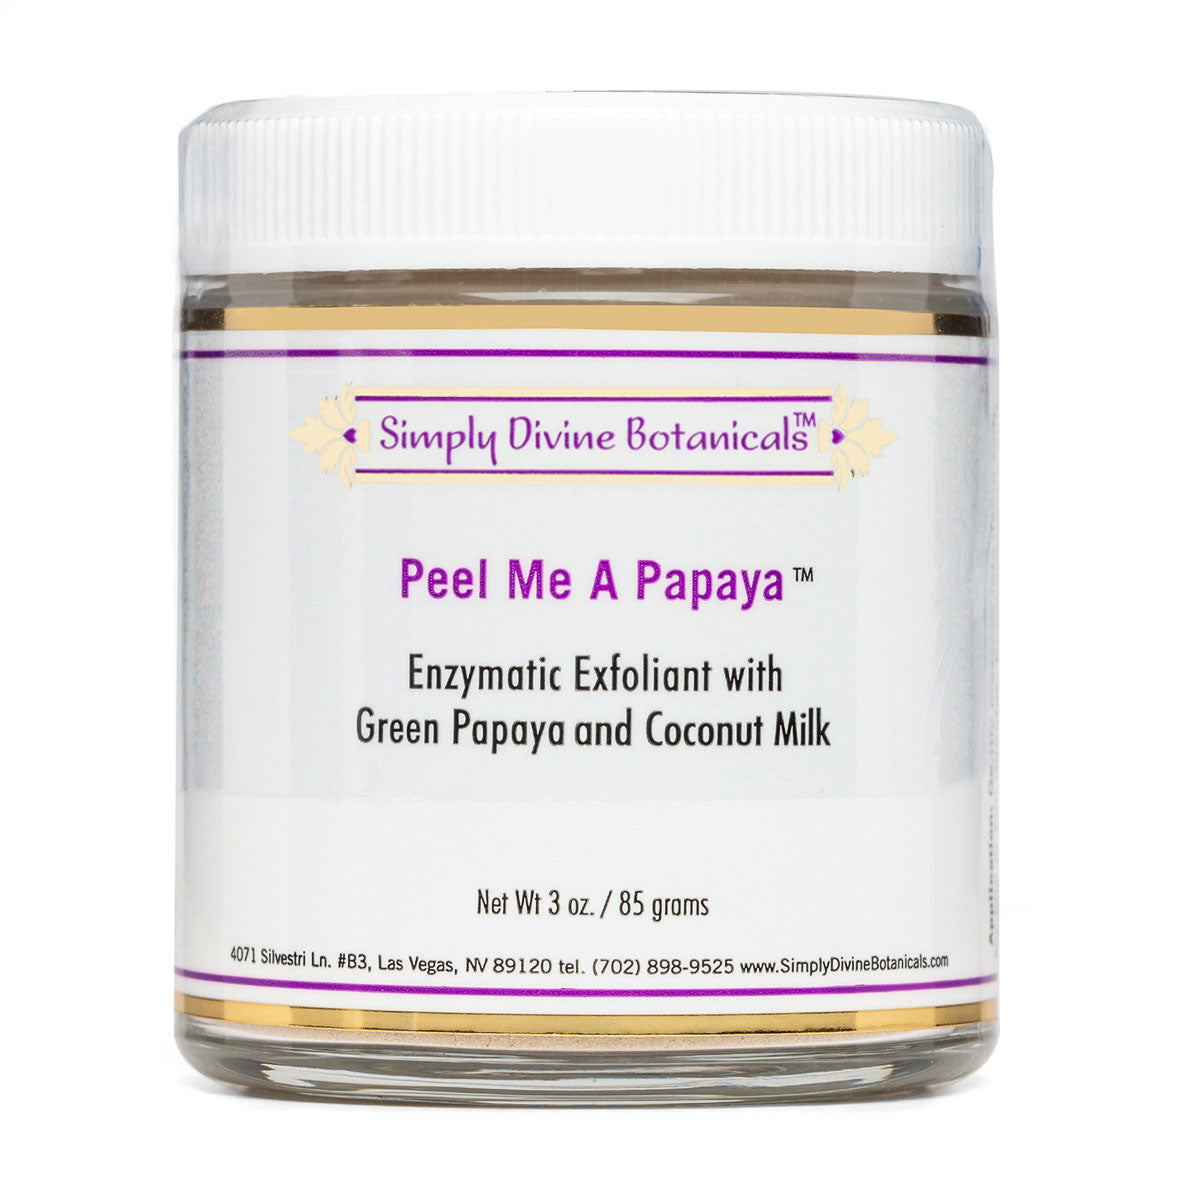 Peel Me A Papaya | Simply Divine Botanicals | Raw Living UK | Skin Care &amp; Beauty | Simply Divine Botanicals Peel Me a Papaya Natural Exfoliant: Green Papaya Powder &amp; Coconut Milk to Smooth Skin. Kaolin Clay &amp; Organic Cornmeal to Absorb Oils.